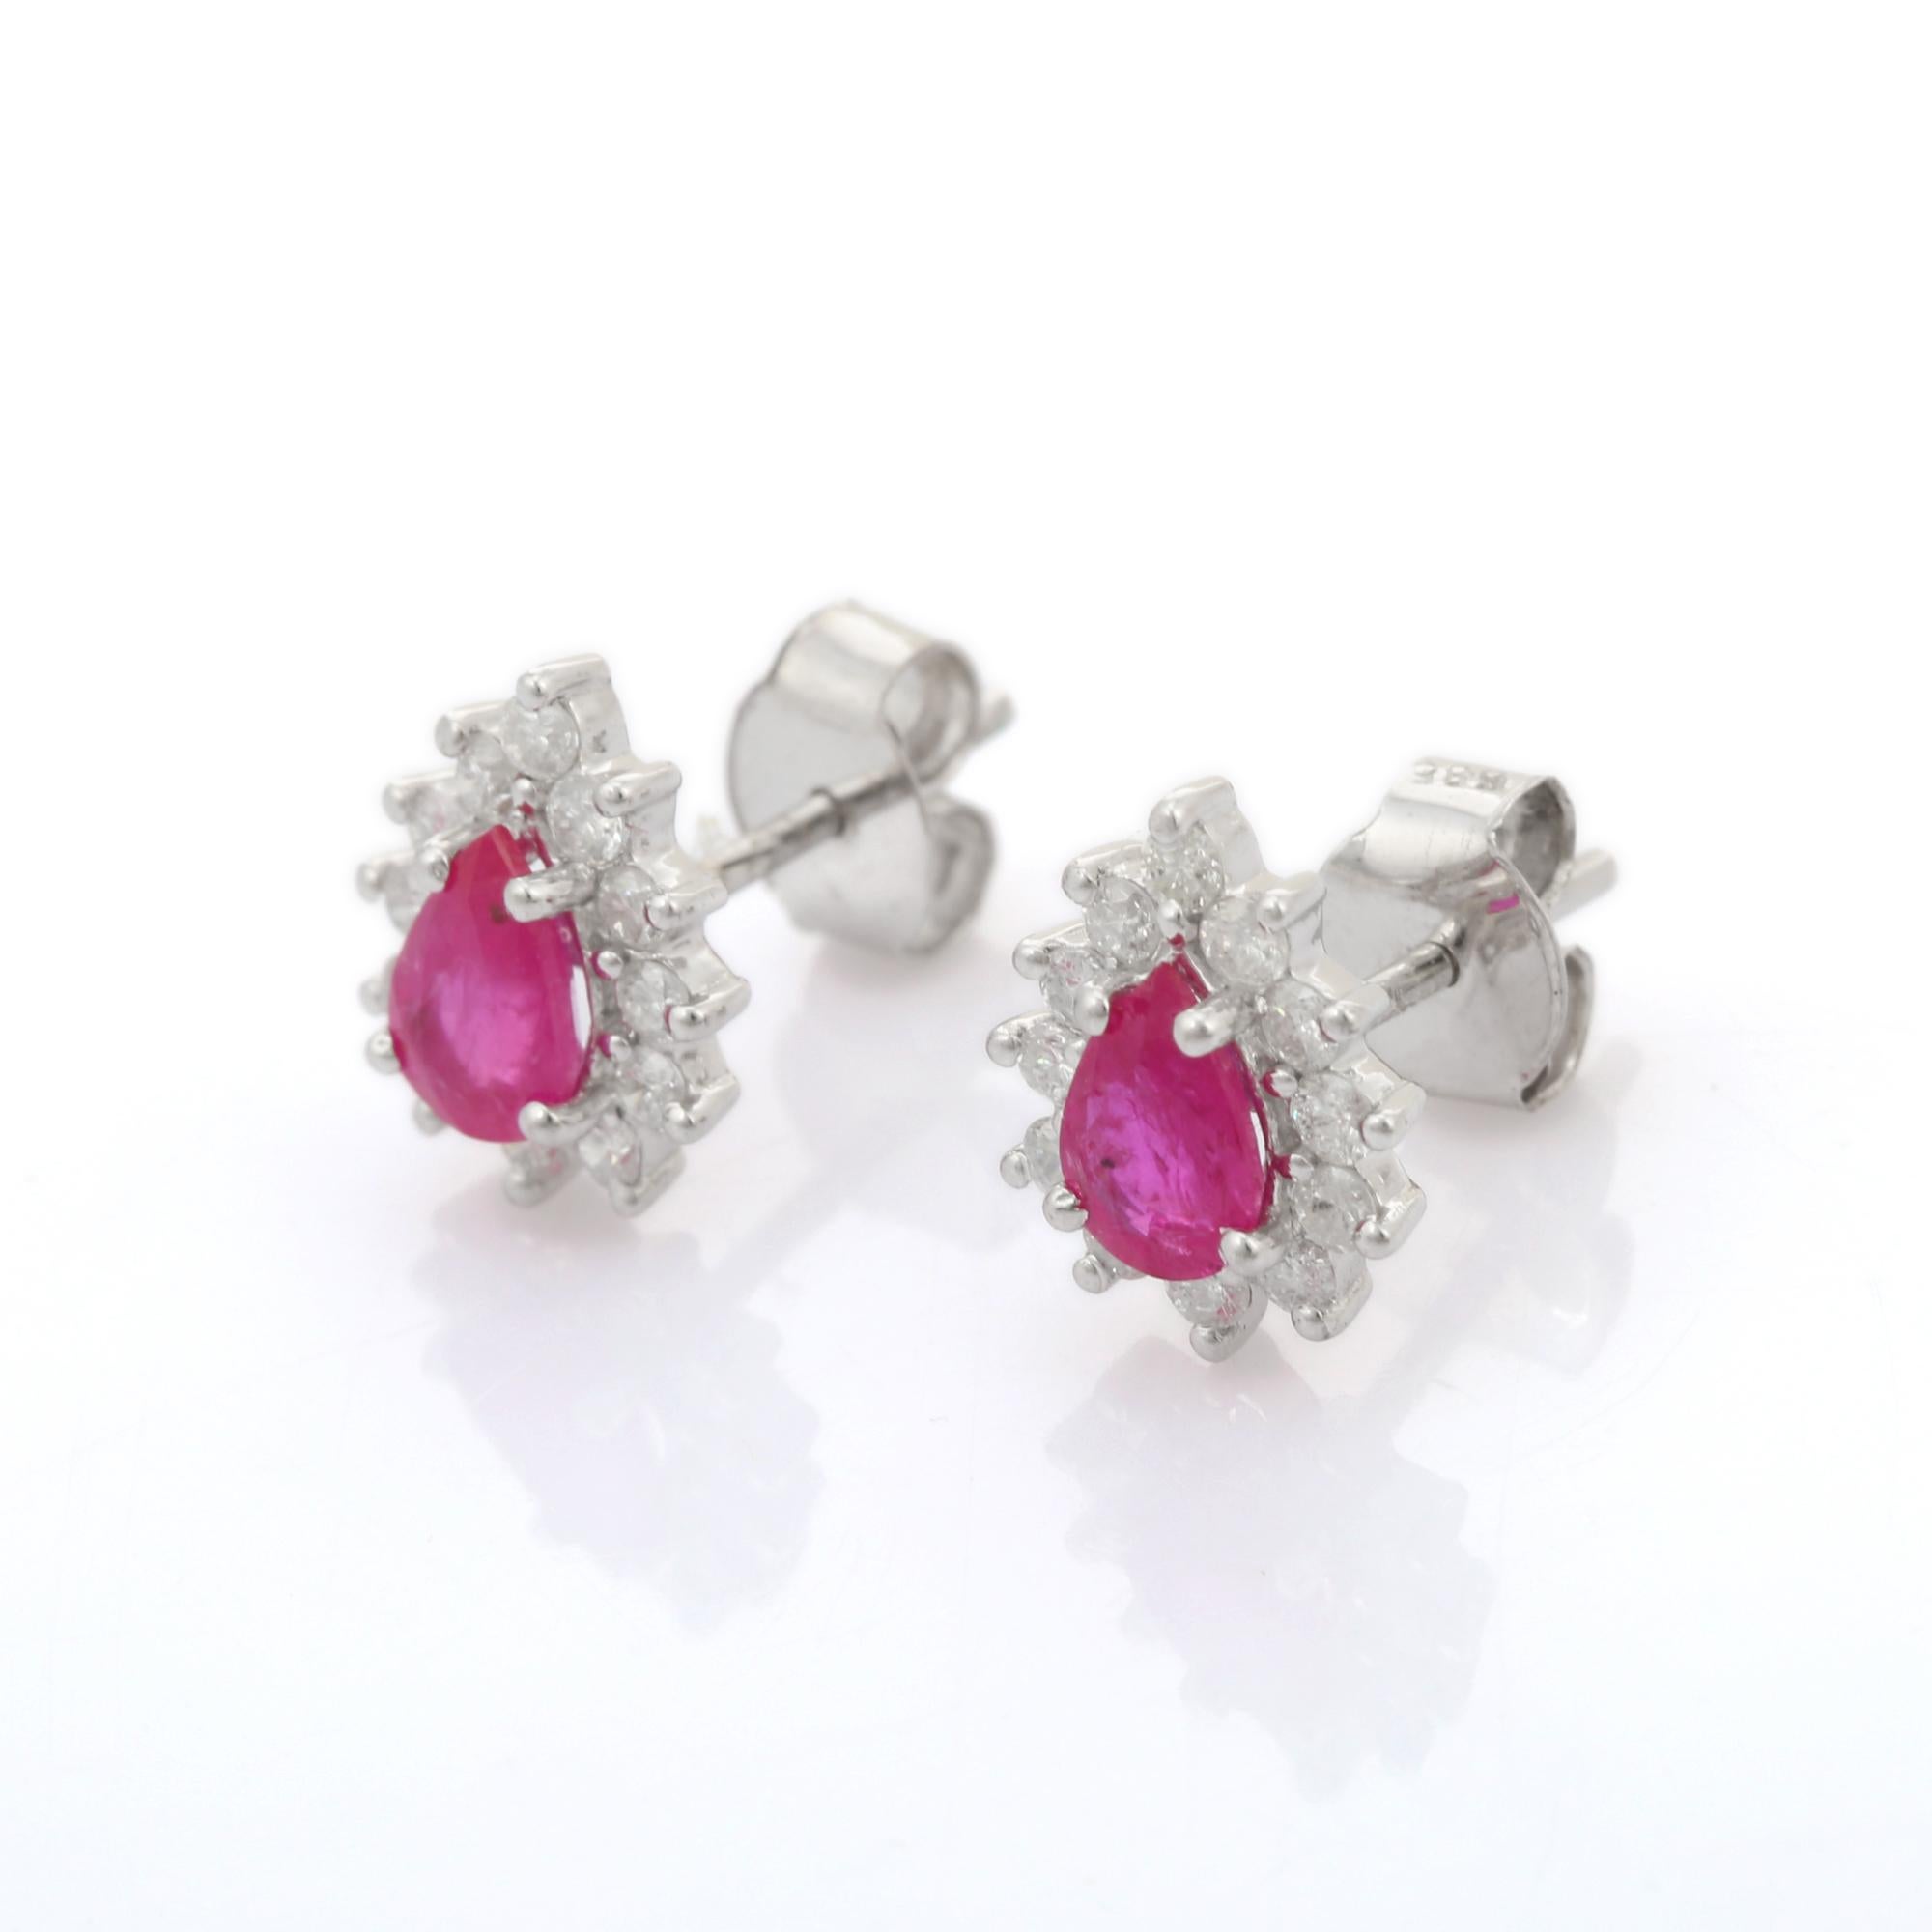 Studs create a subtle beauty while showcasing the colors of the natural precious gemstones and illuminating diamonds making a statement.
Fine Pear Cut 1.02 ct Ruby Stud Earrings with Diamonds in 14K gold. Embrace your look with these stunning pair